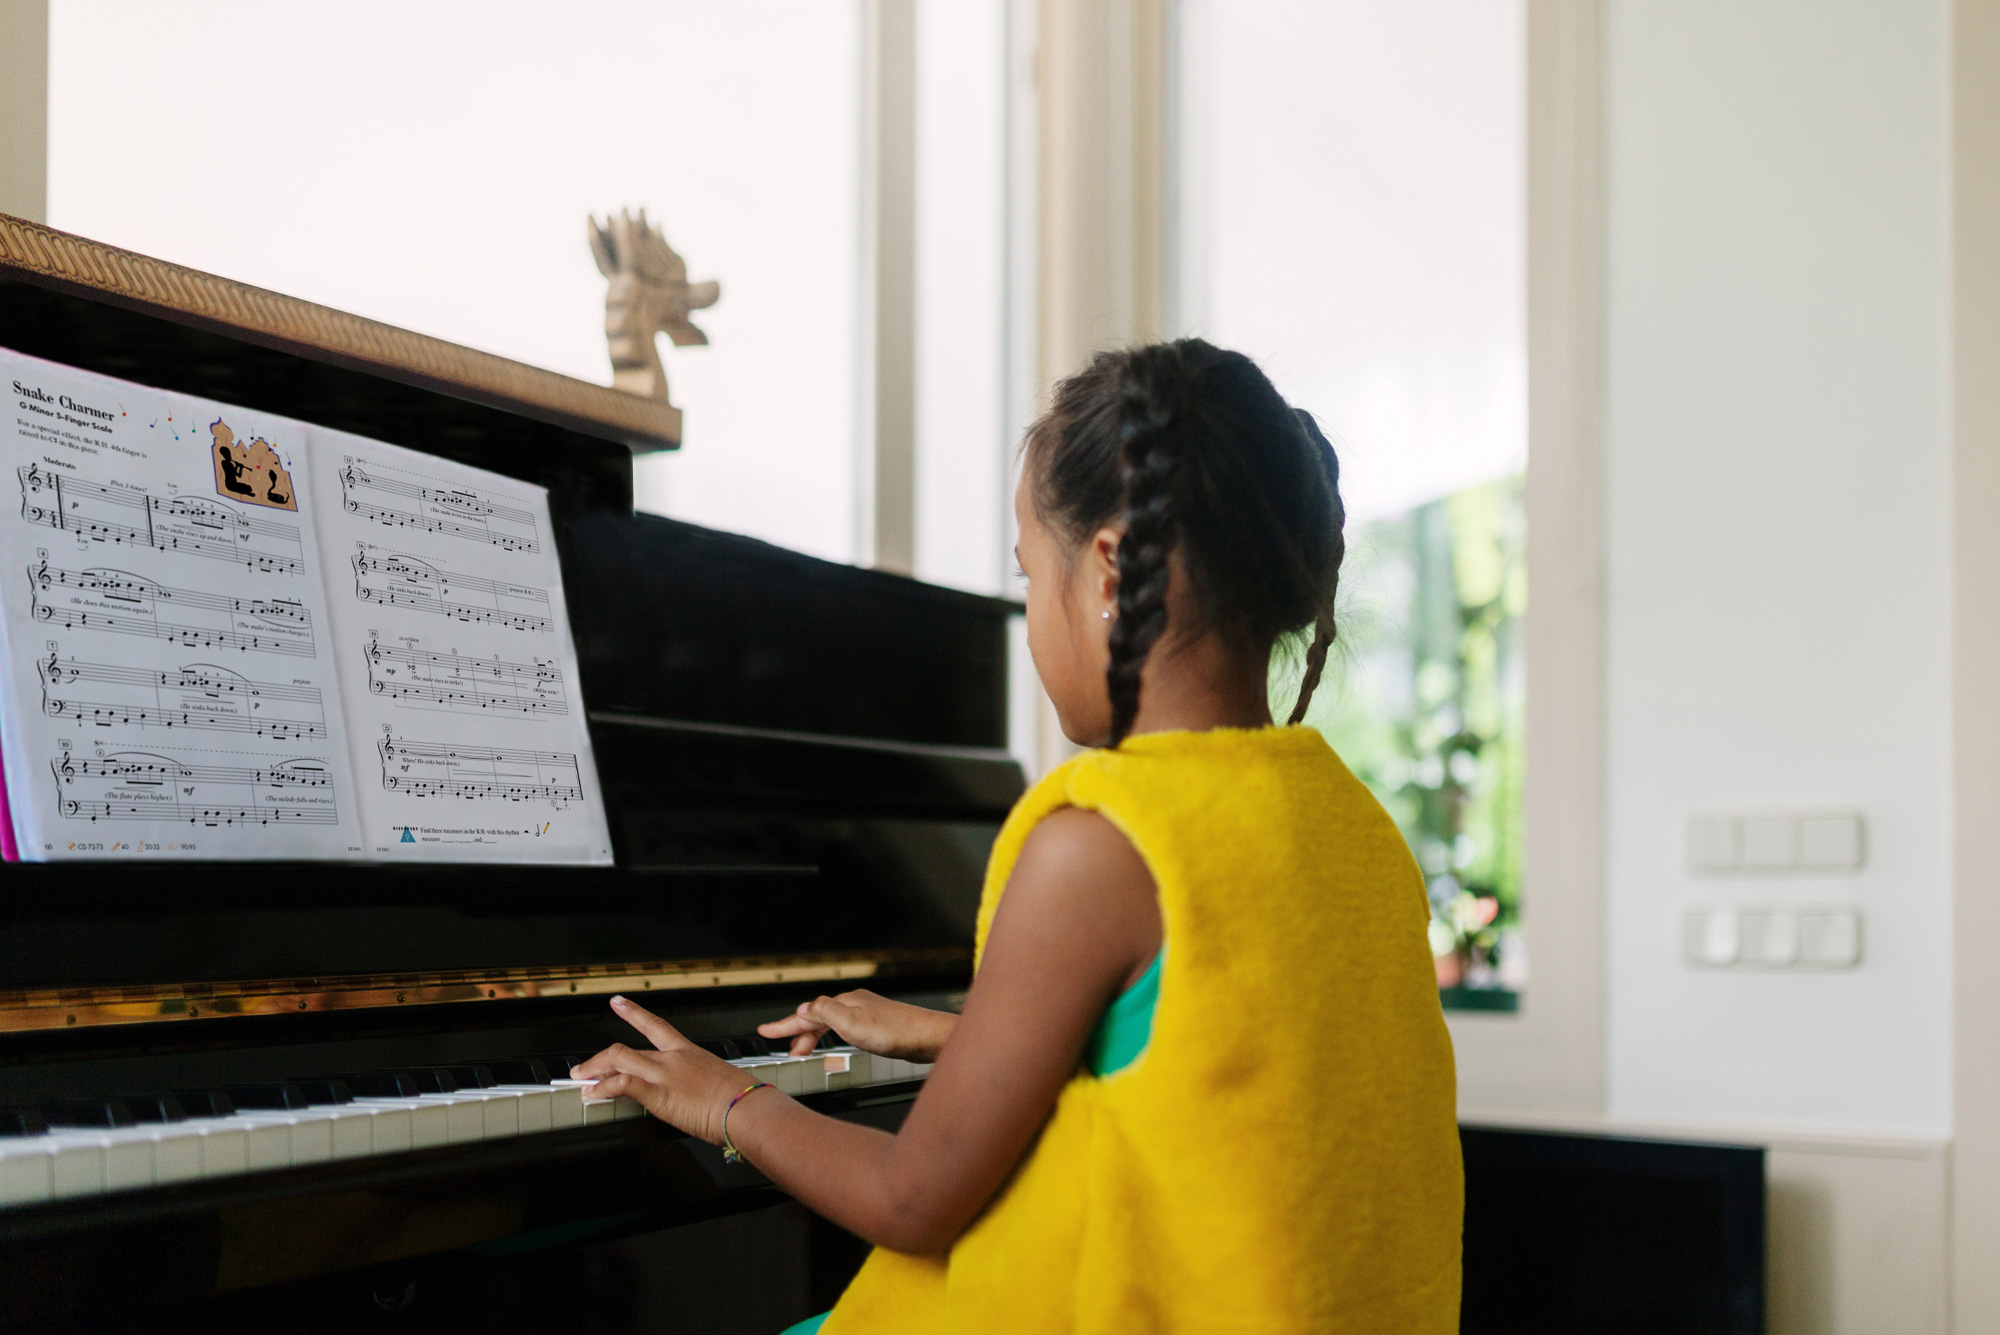 Calaméo - How to Teach Piano to Young Children Using Games